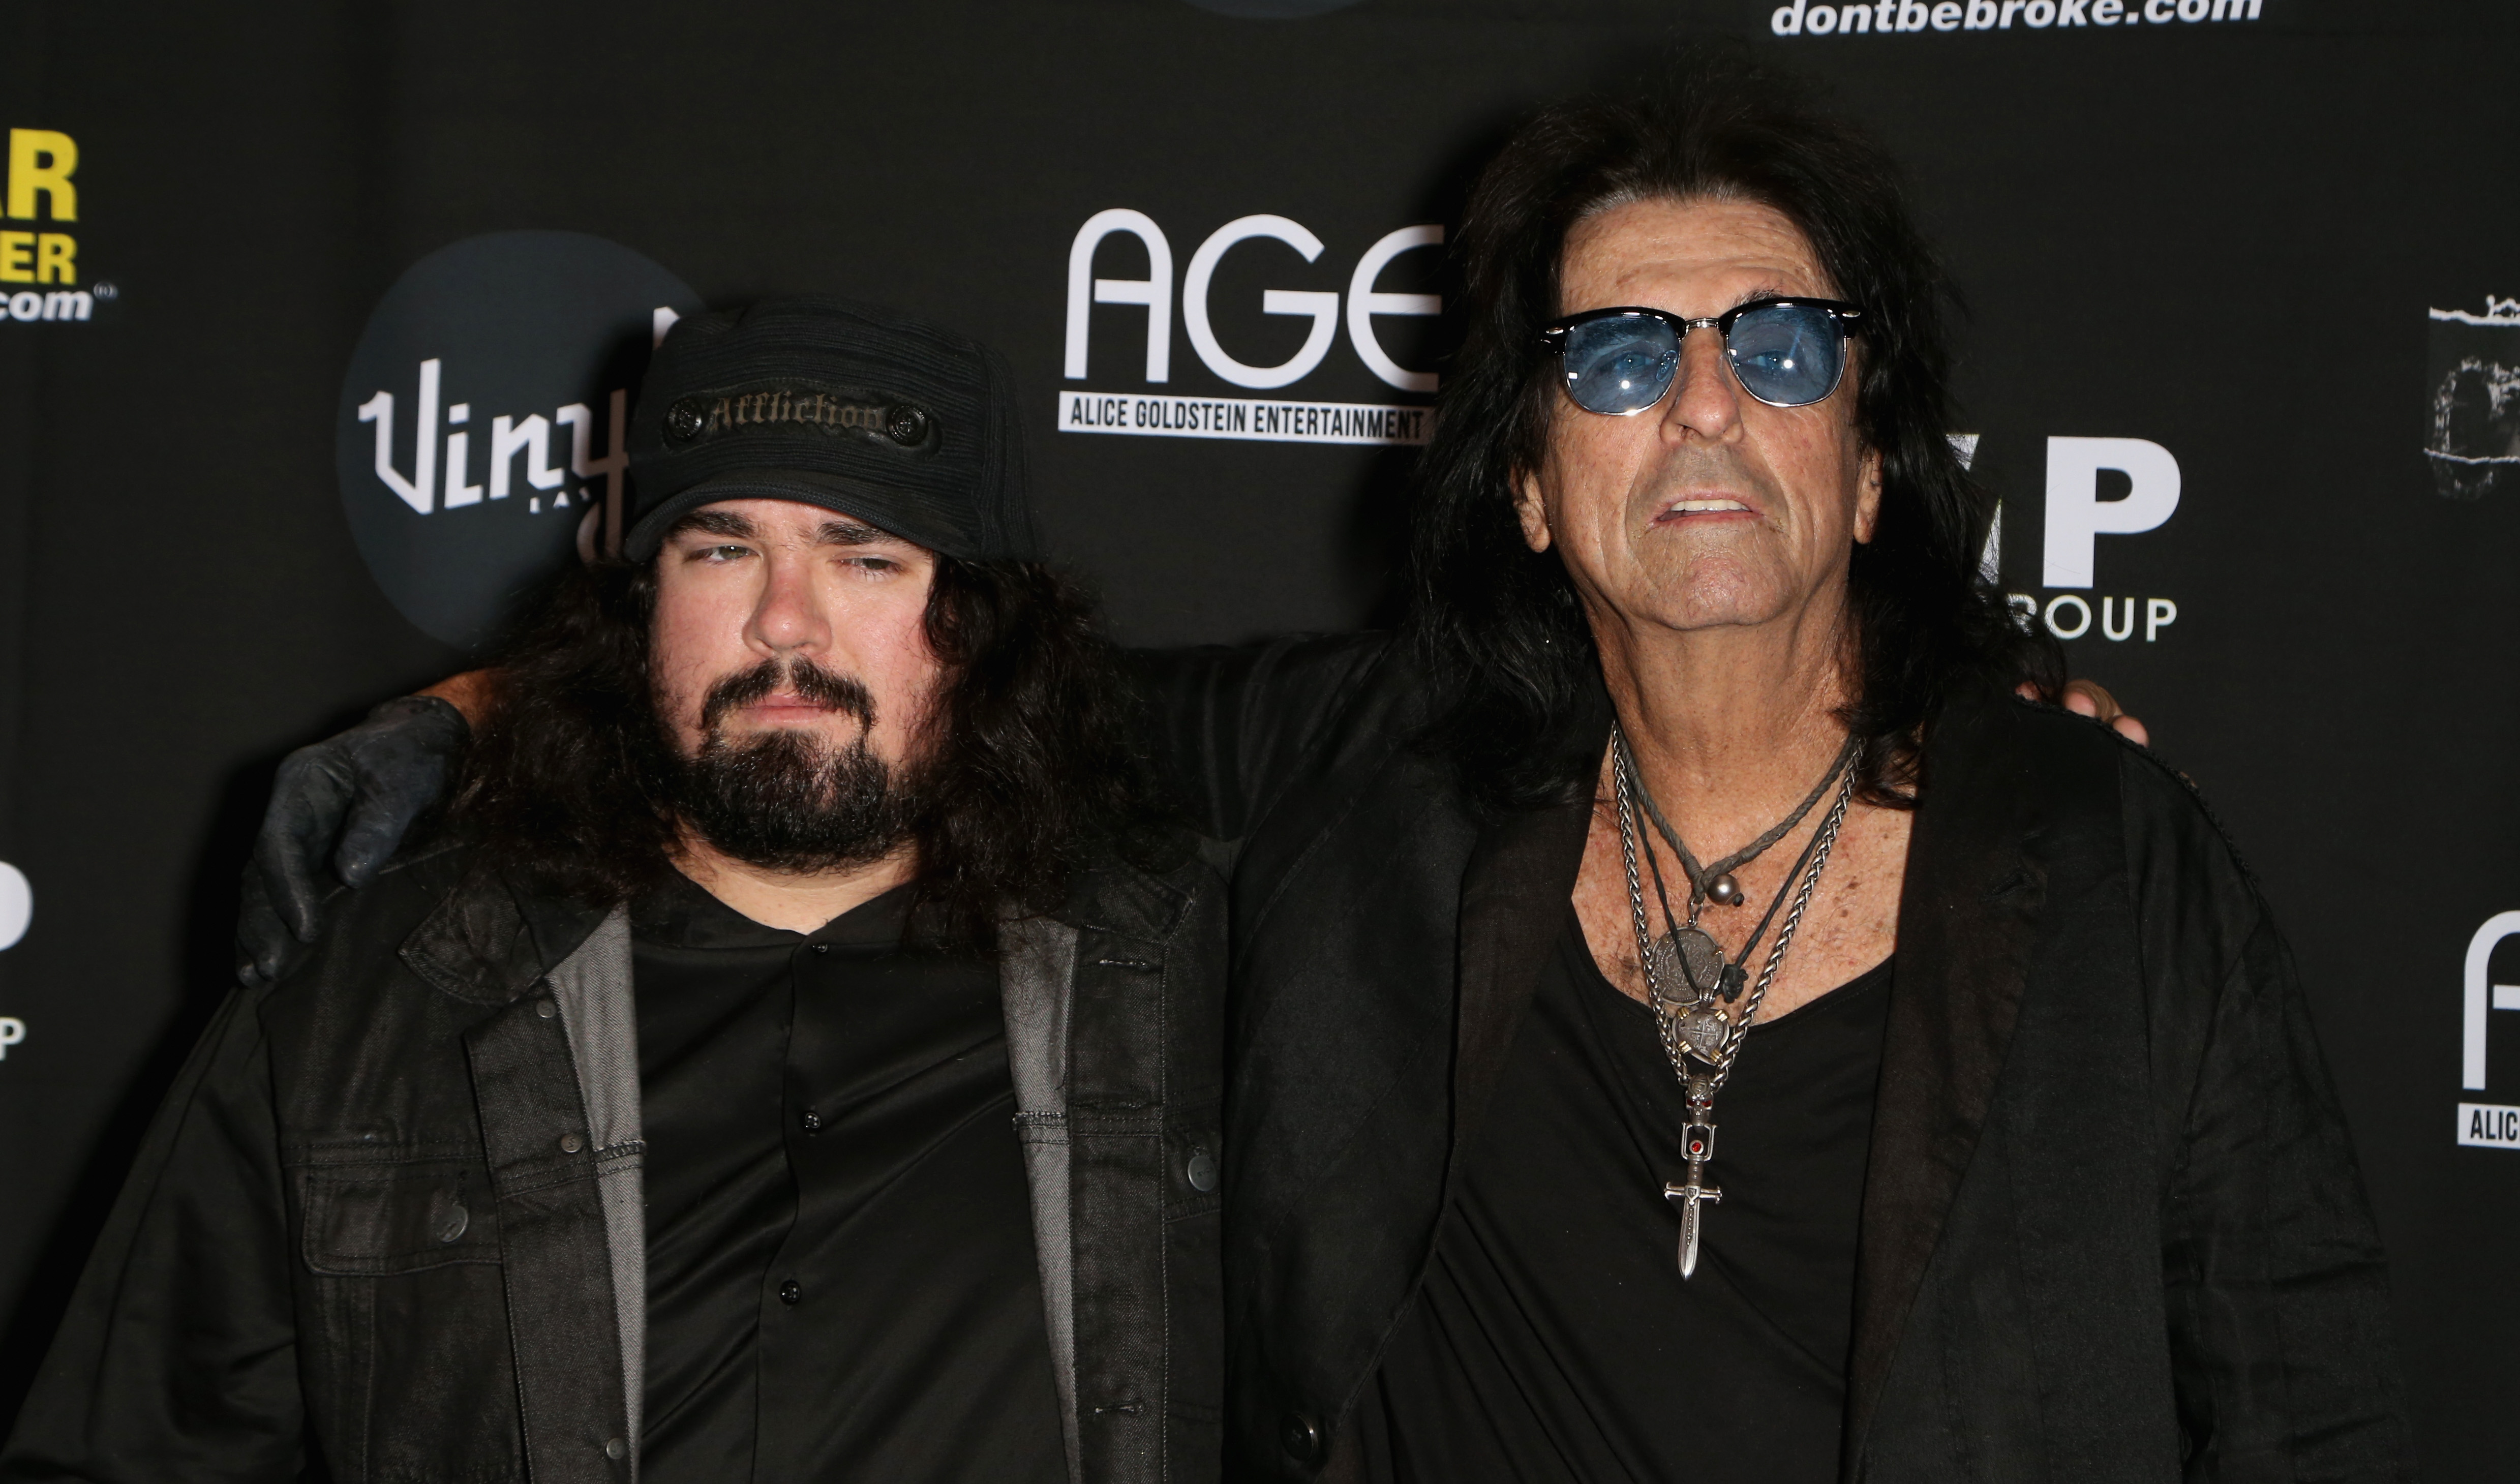 Dash Cooper and his father Alice Cooper attend a CD release party for CO-OP at Vinyl inside the Hard Rock Hotel & Casino on August 9, 2018, in Las Vegas, Nevada.  | Source: Getty Images